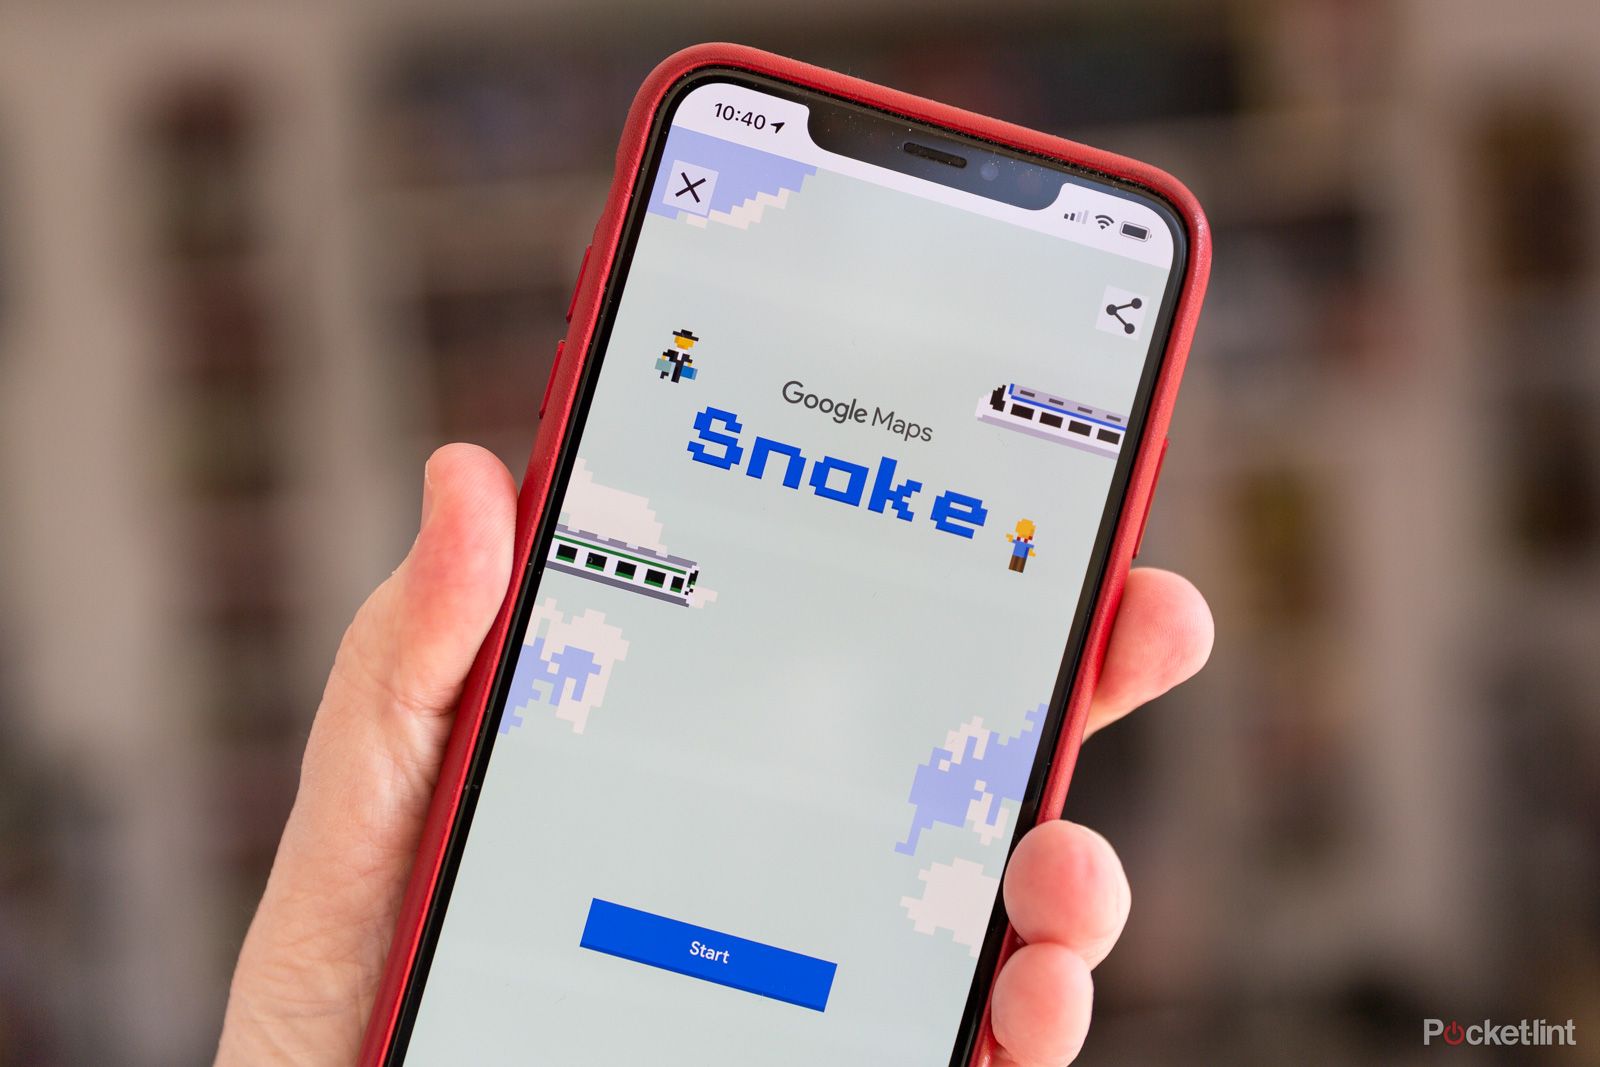 April Fools' Day: Google Maps Snake Game Released as Gag, Will Be